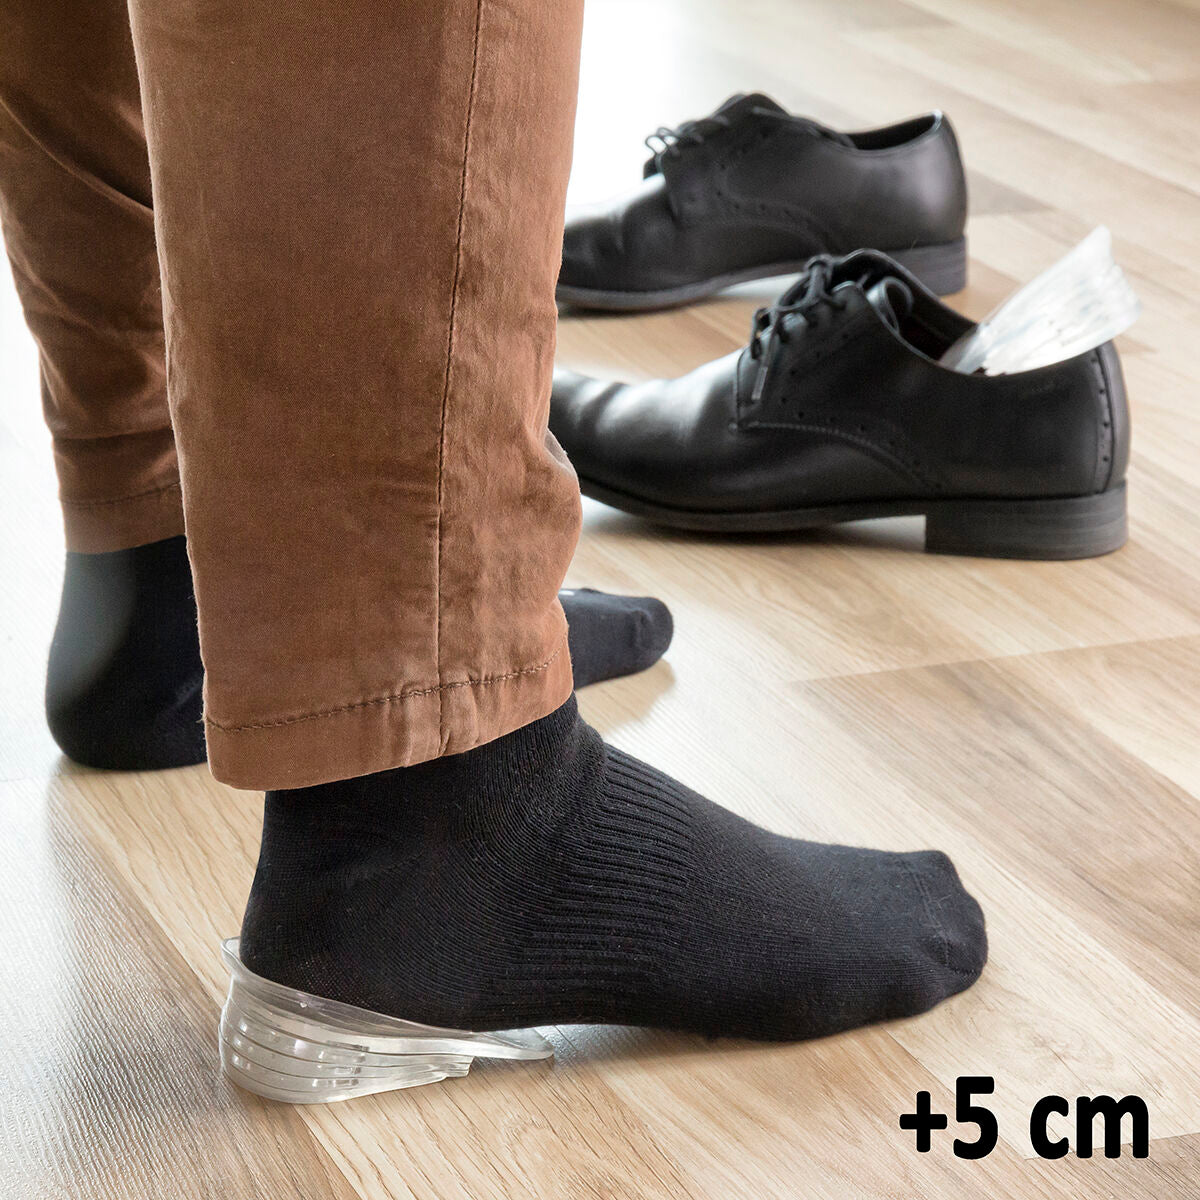 InnovaGoods x5 cm Height-Boosting Insoles